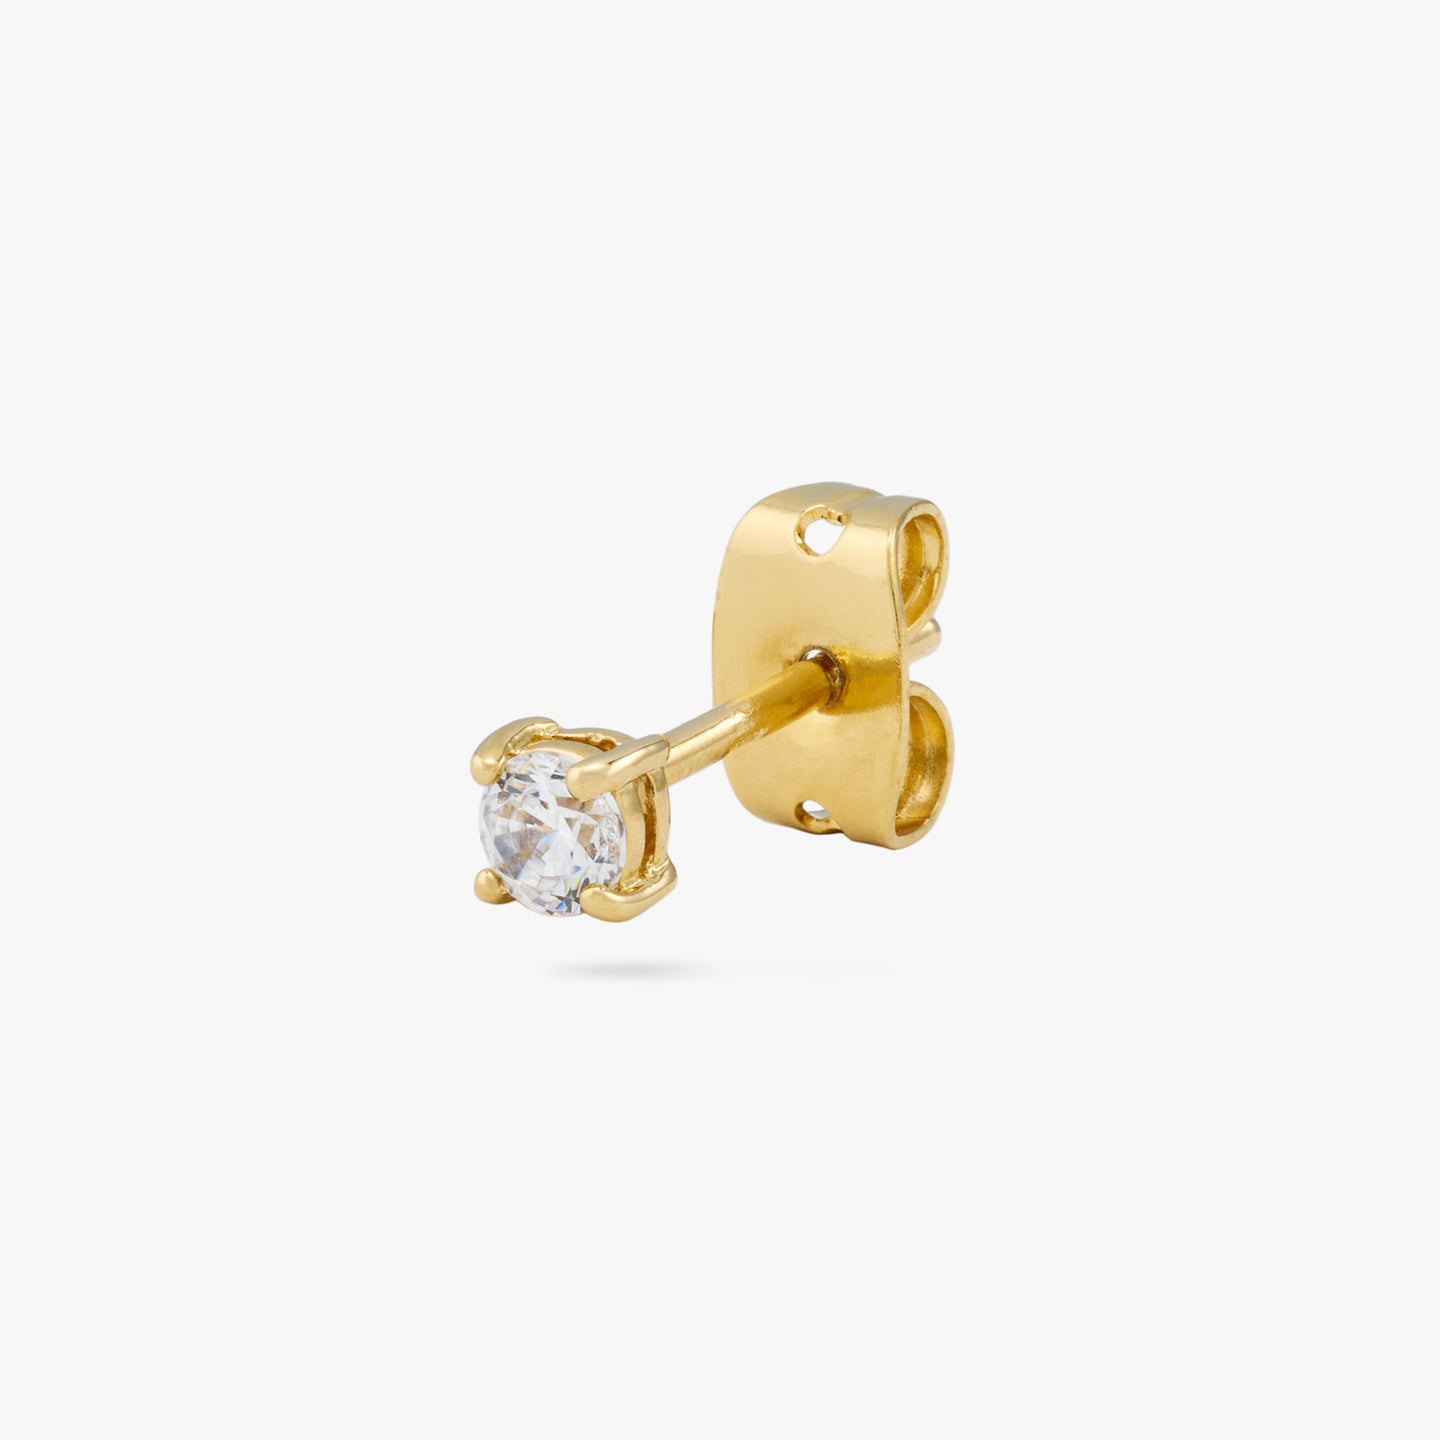 Small CZ stud measuring 3mm. color:null|gold/clear